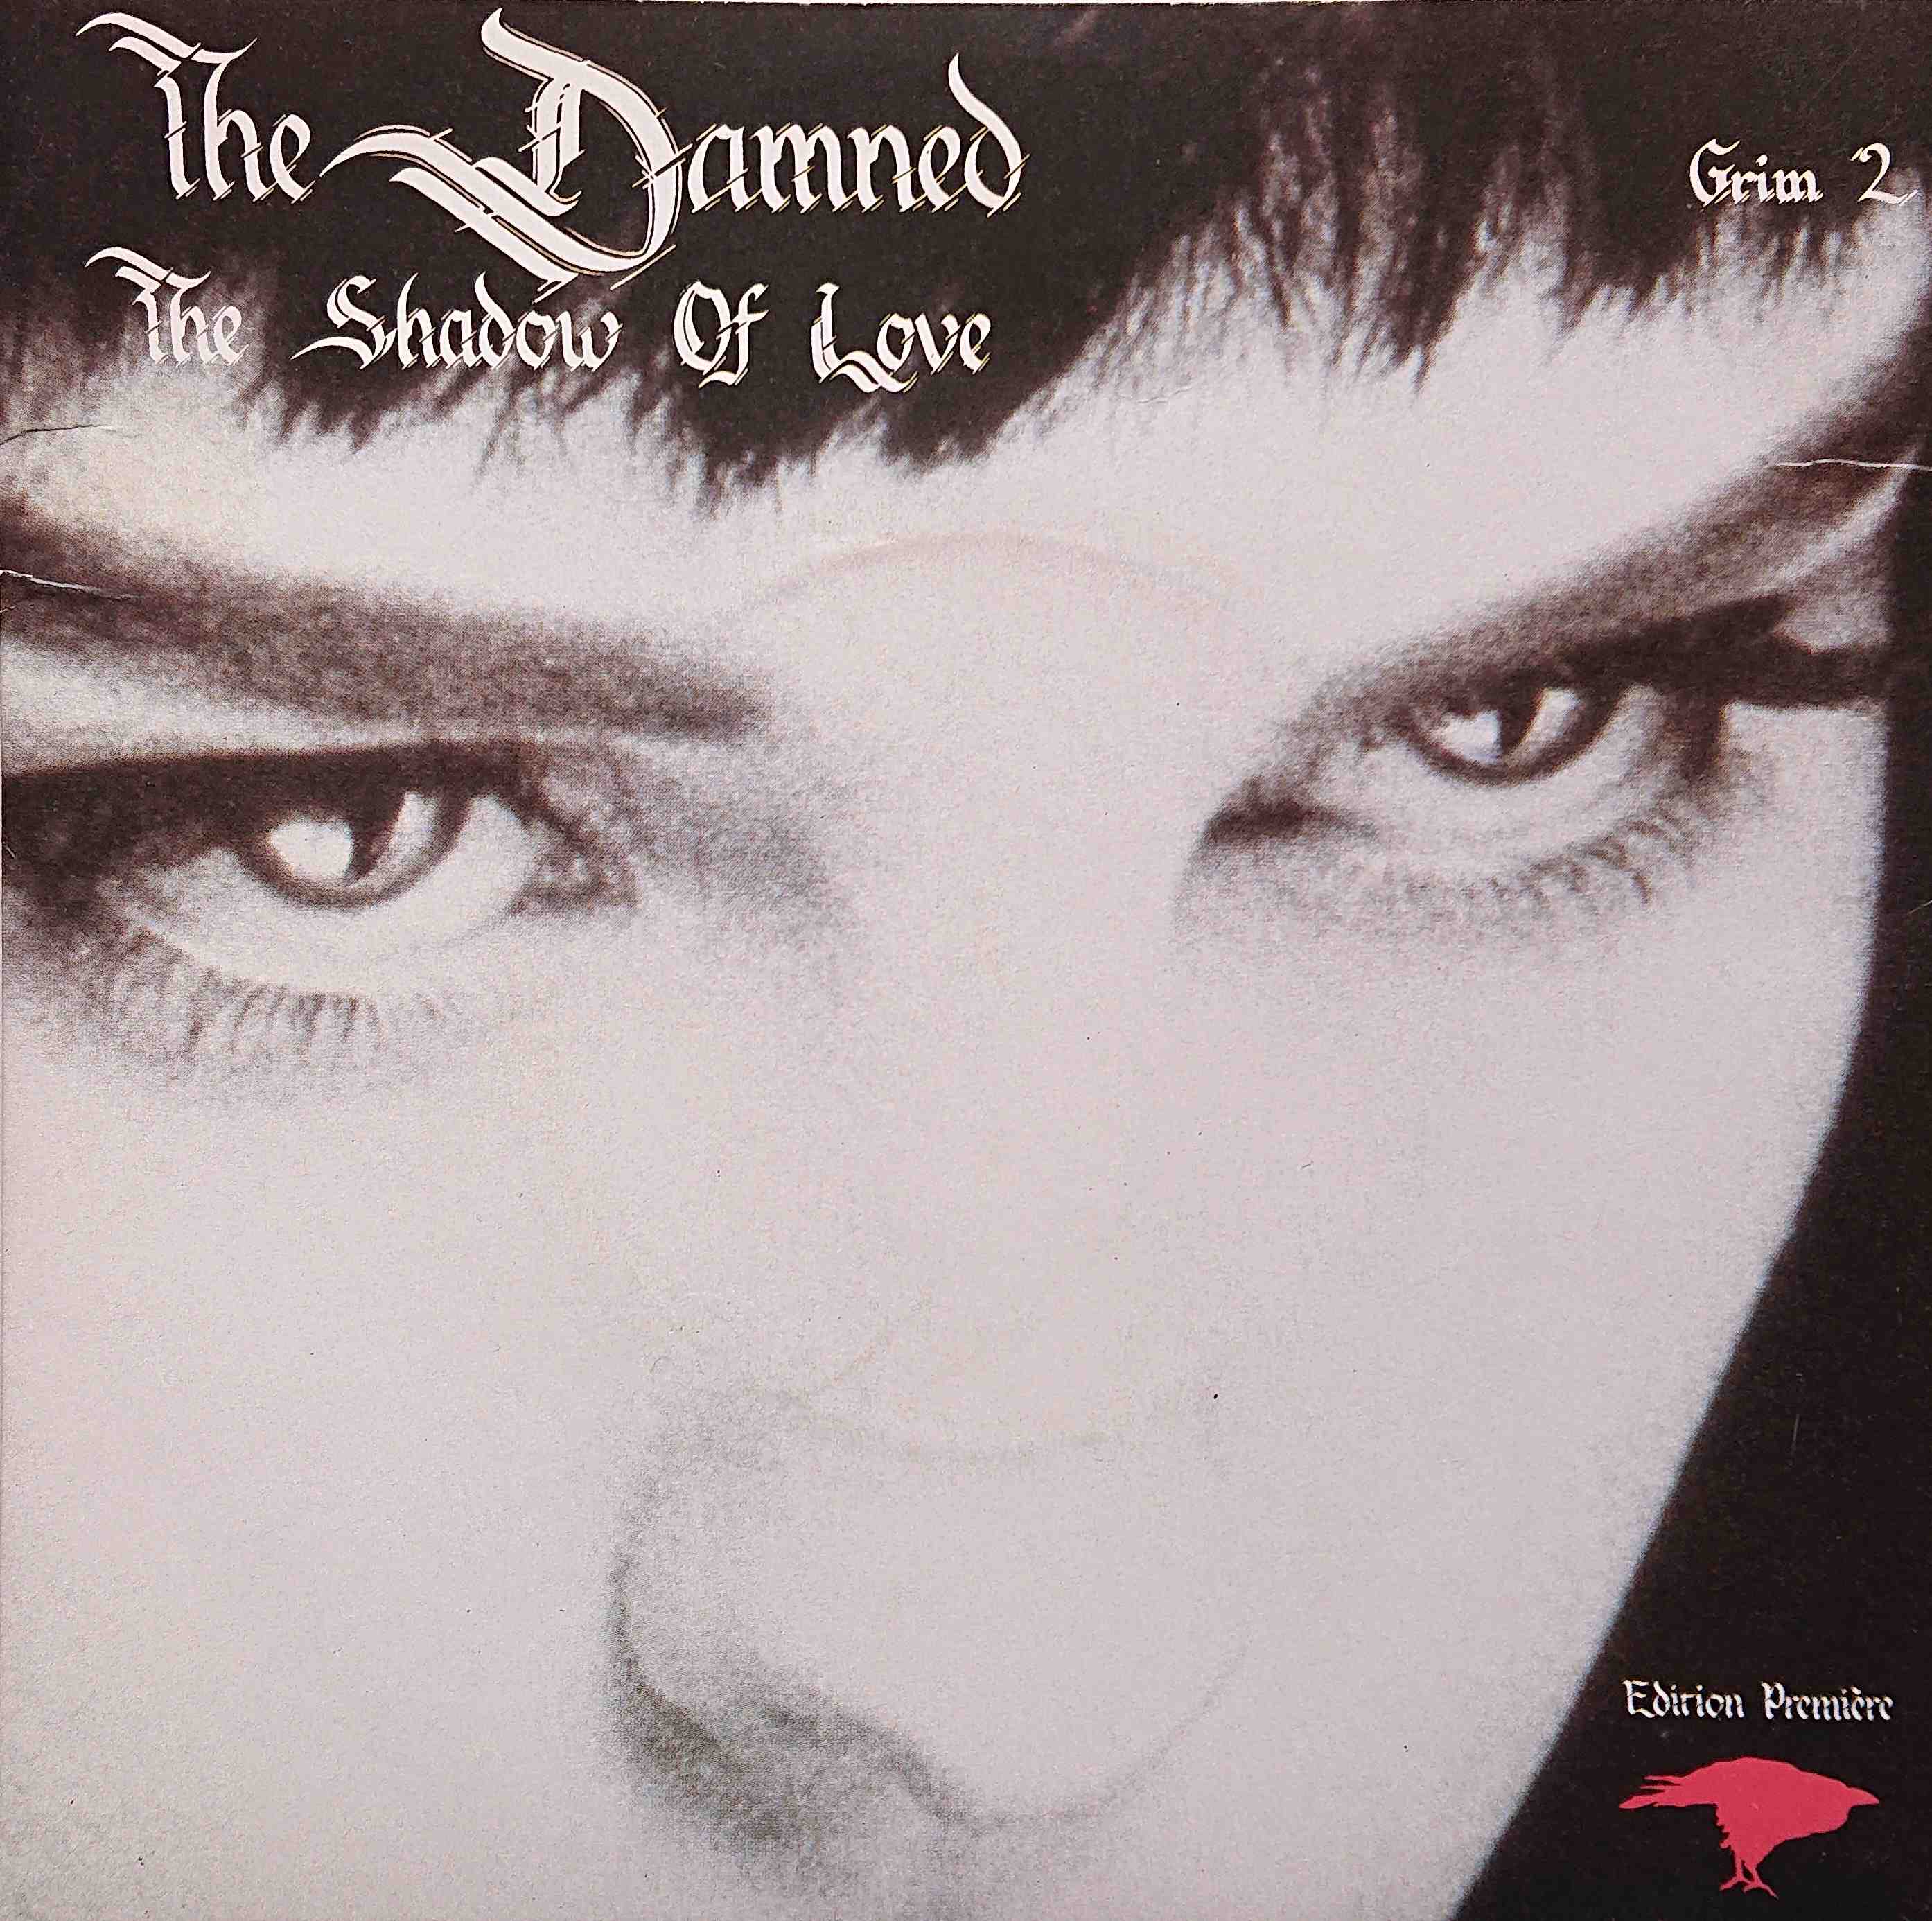 Picture of The shadow of love by artist The Damned  